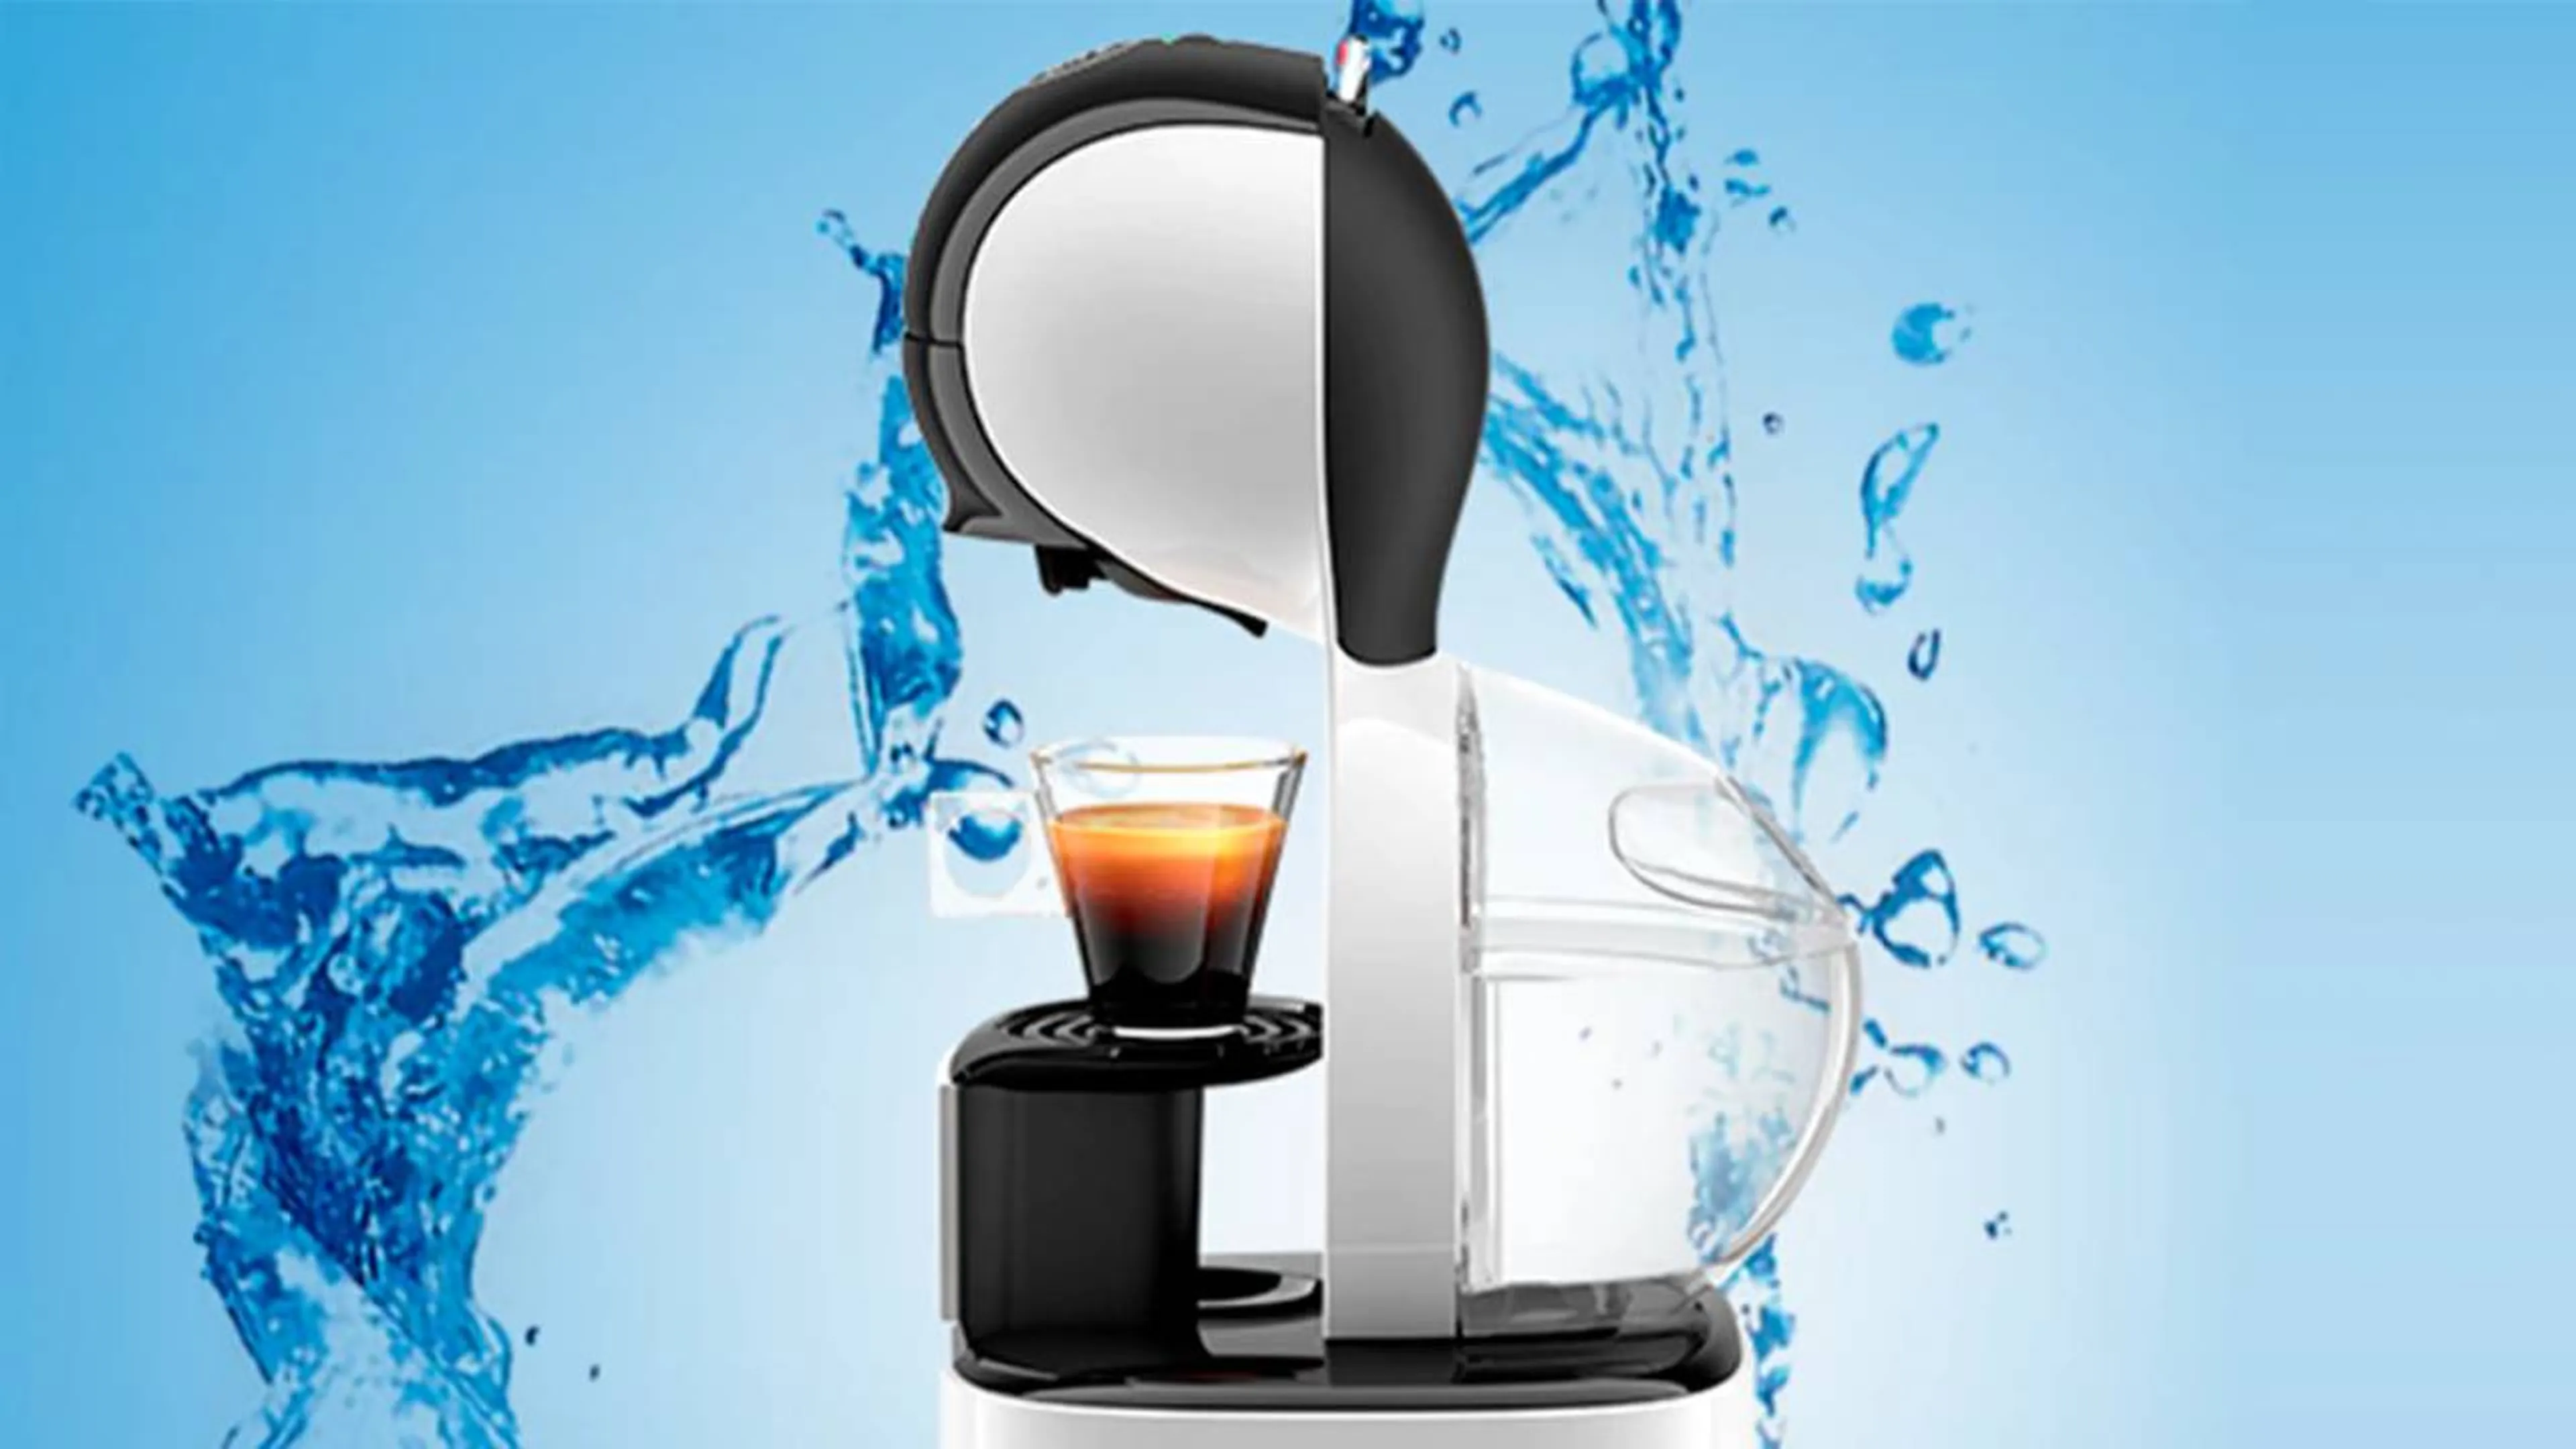 ≫ Cambiar Goma Cafetera Dolce Gusto